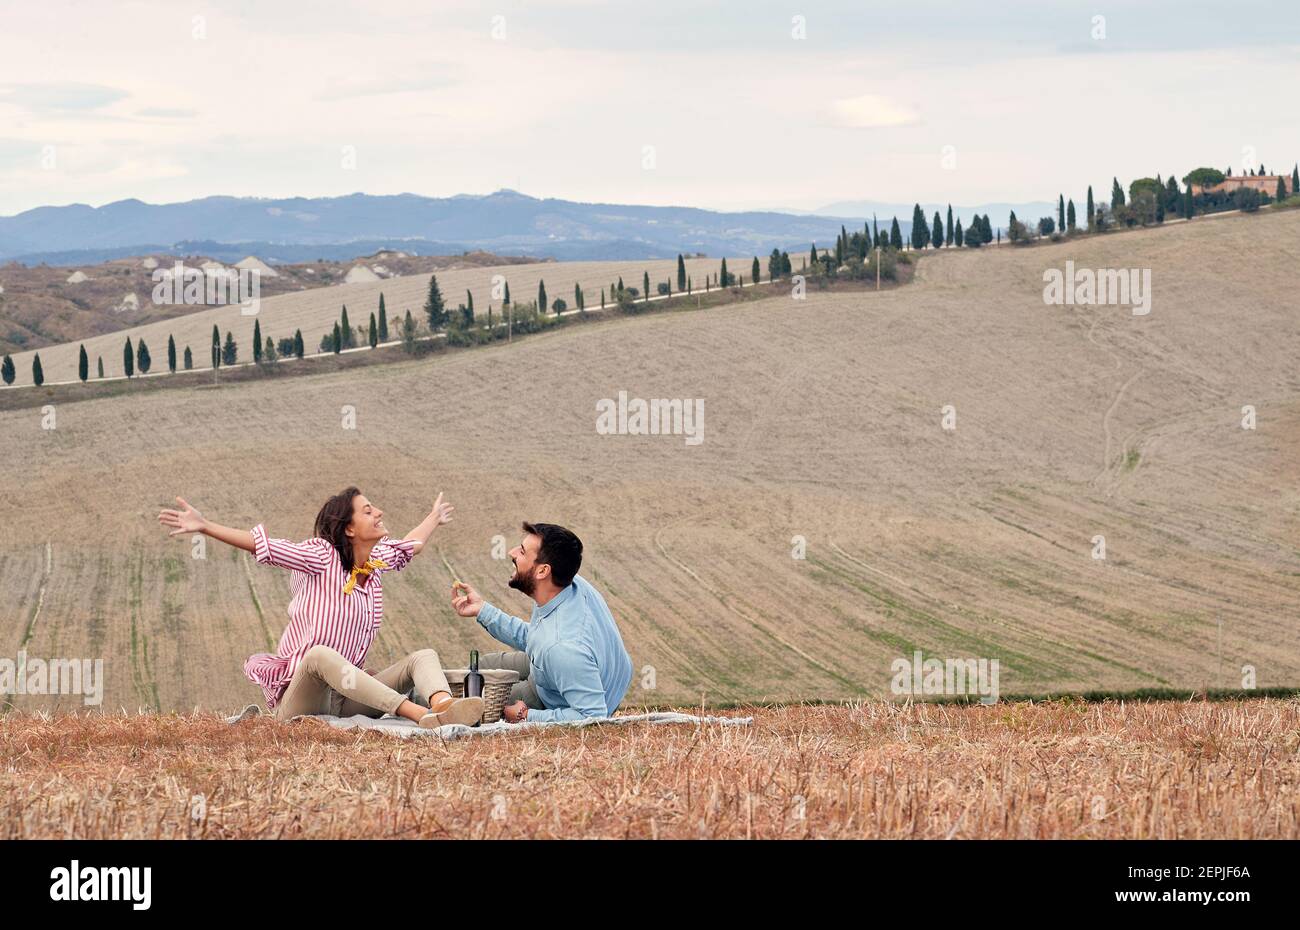 A young cheerful couple is delighted by a large meadow where they have a picnic on a beautiful day. Love, relationship, picnic, together Stock Photo